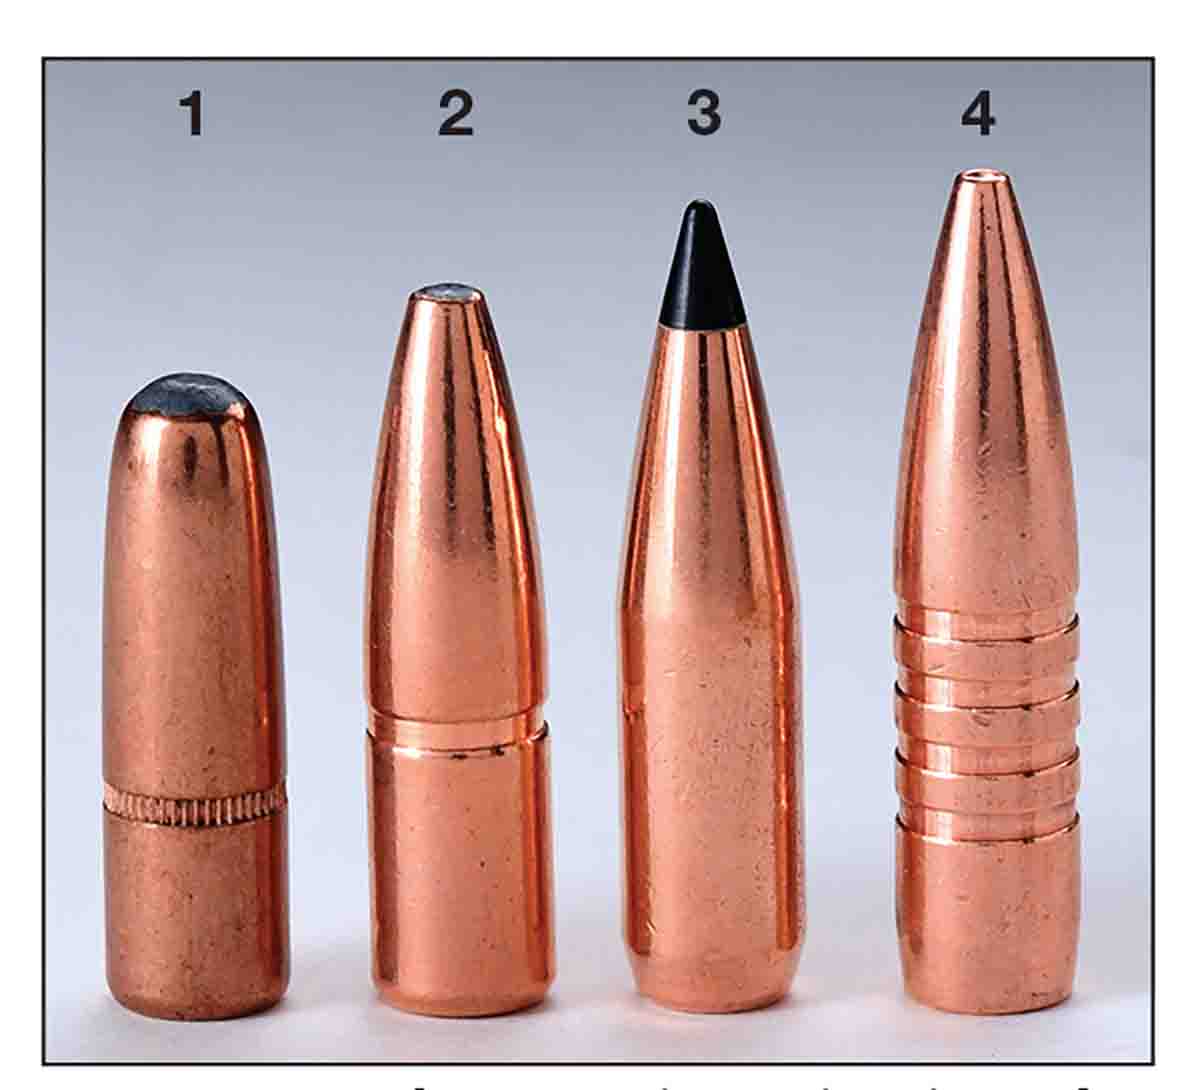 One way to decrease intrusion into the powder space is to use a shorter bullet at the sacrifice of ballistic coefficient. These .30-caliber 180-grain bullets include a (1) Hornady roundnose, (2) Swift A-Frame, (3) Swift Scirocco II and a (4) Barnes Triple Shock.